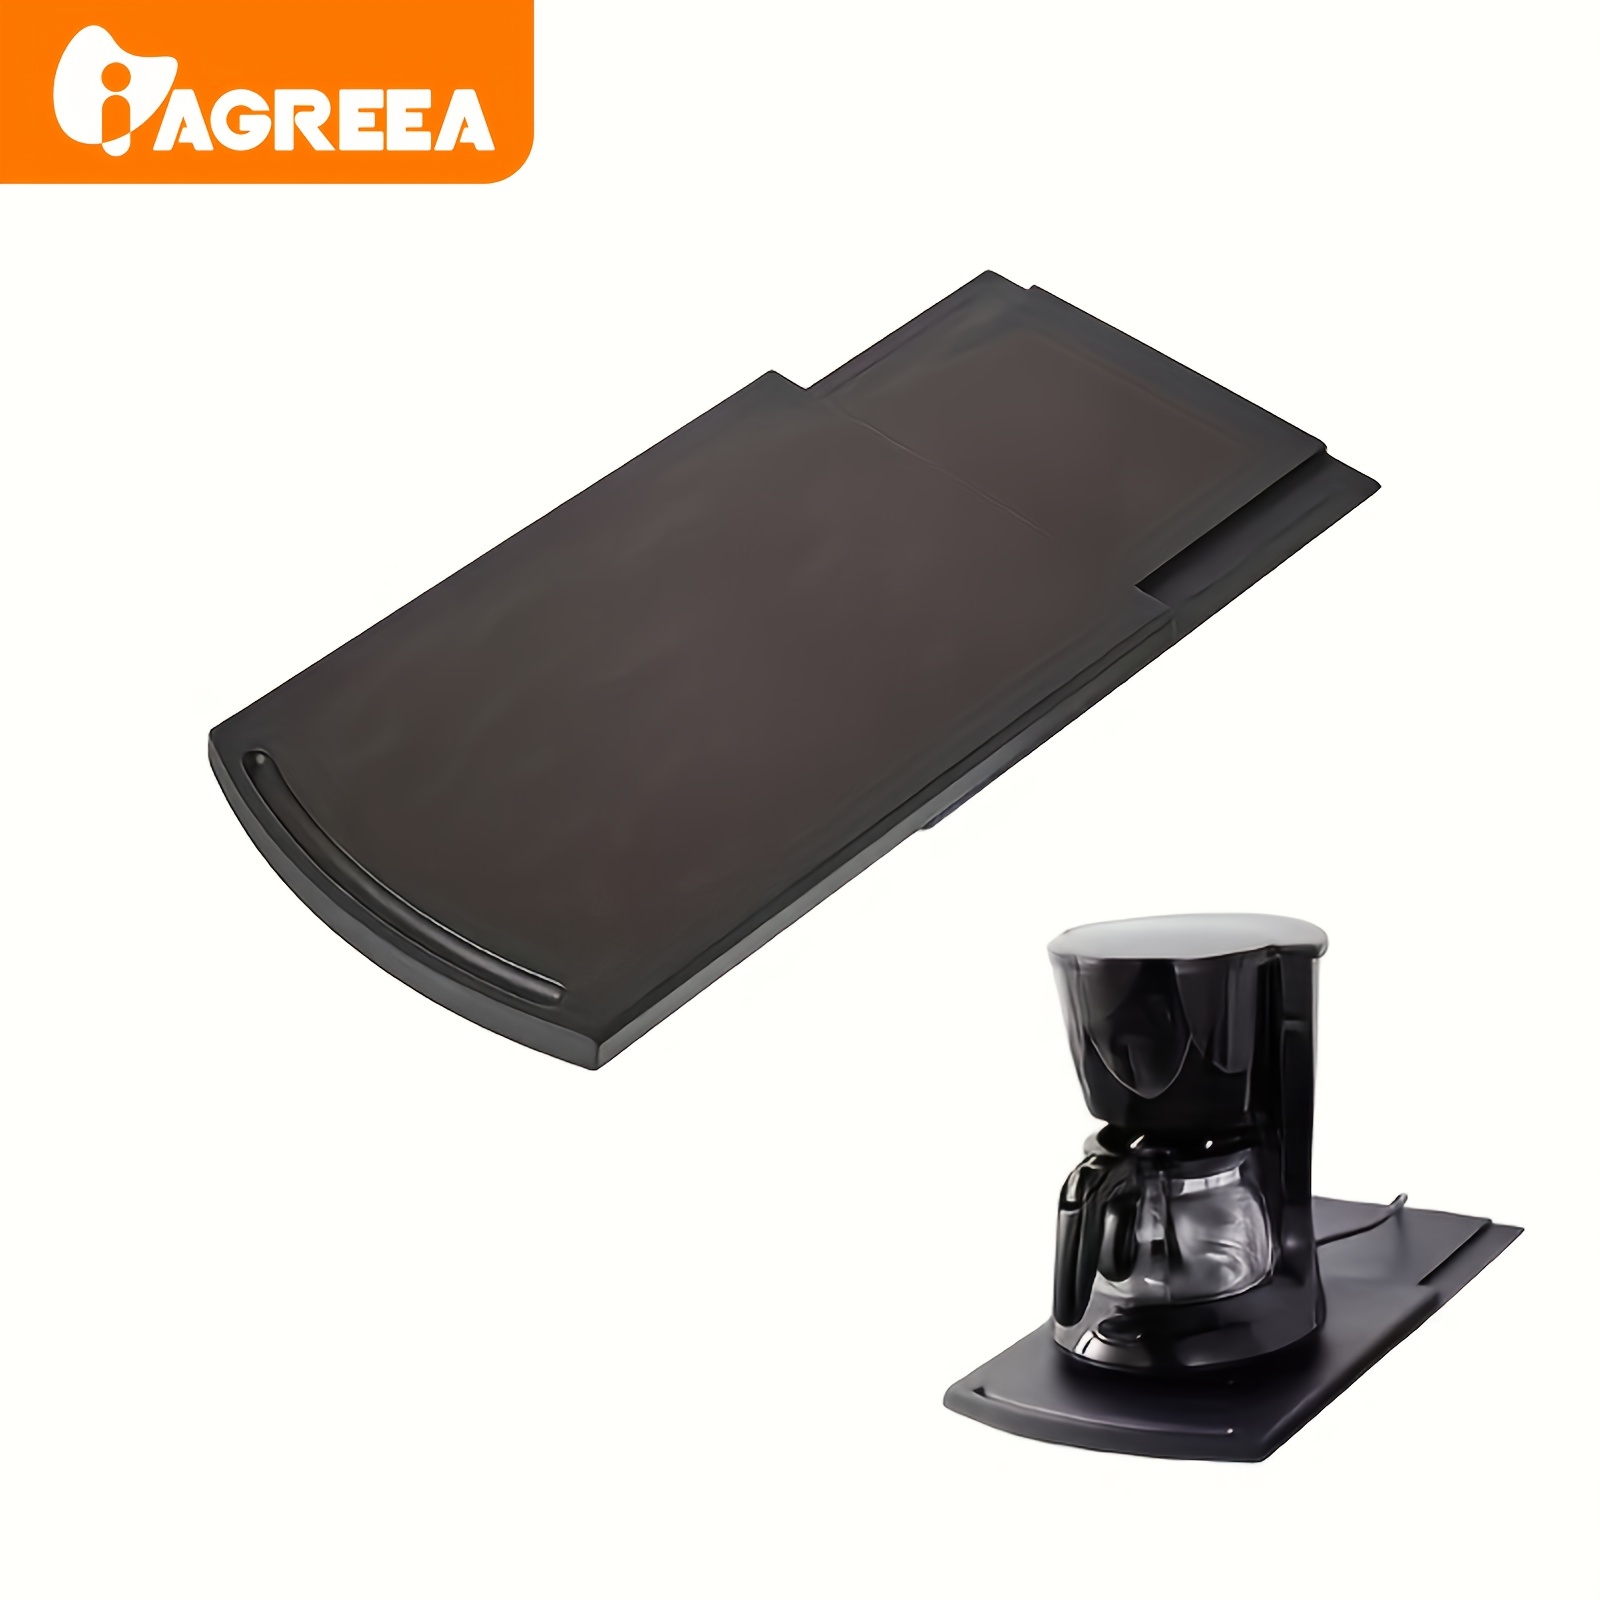 Coffee Machine Base Plate Kitchen Appliance Sliding Tray Rolling Tray  Countertop Storage Moving